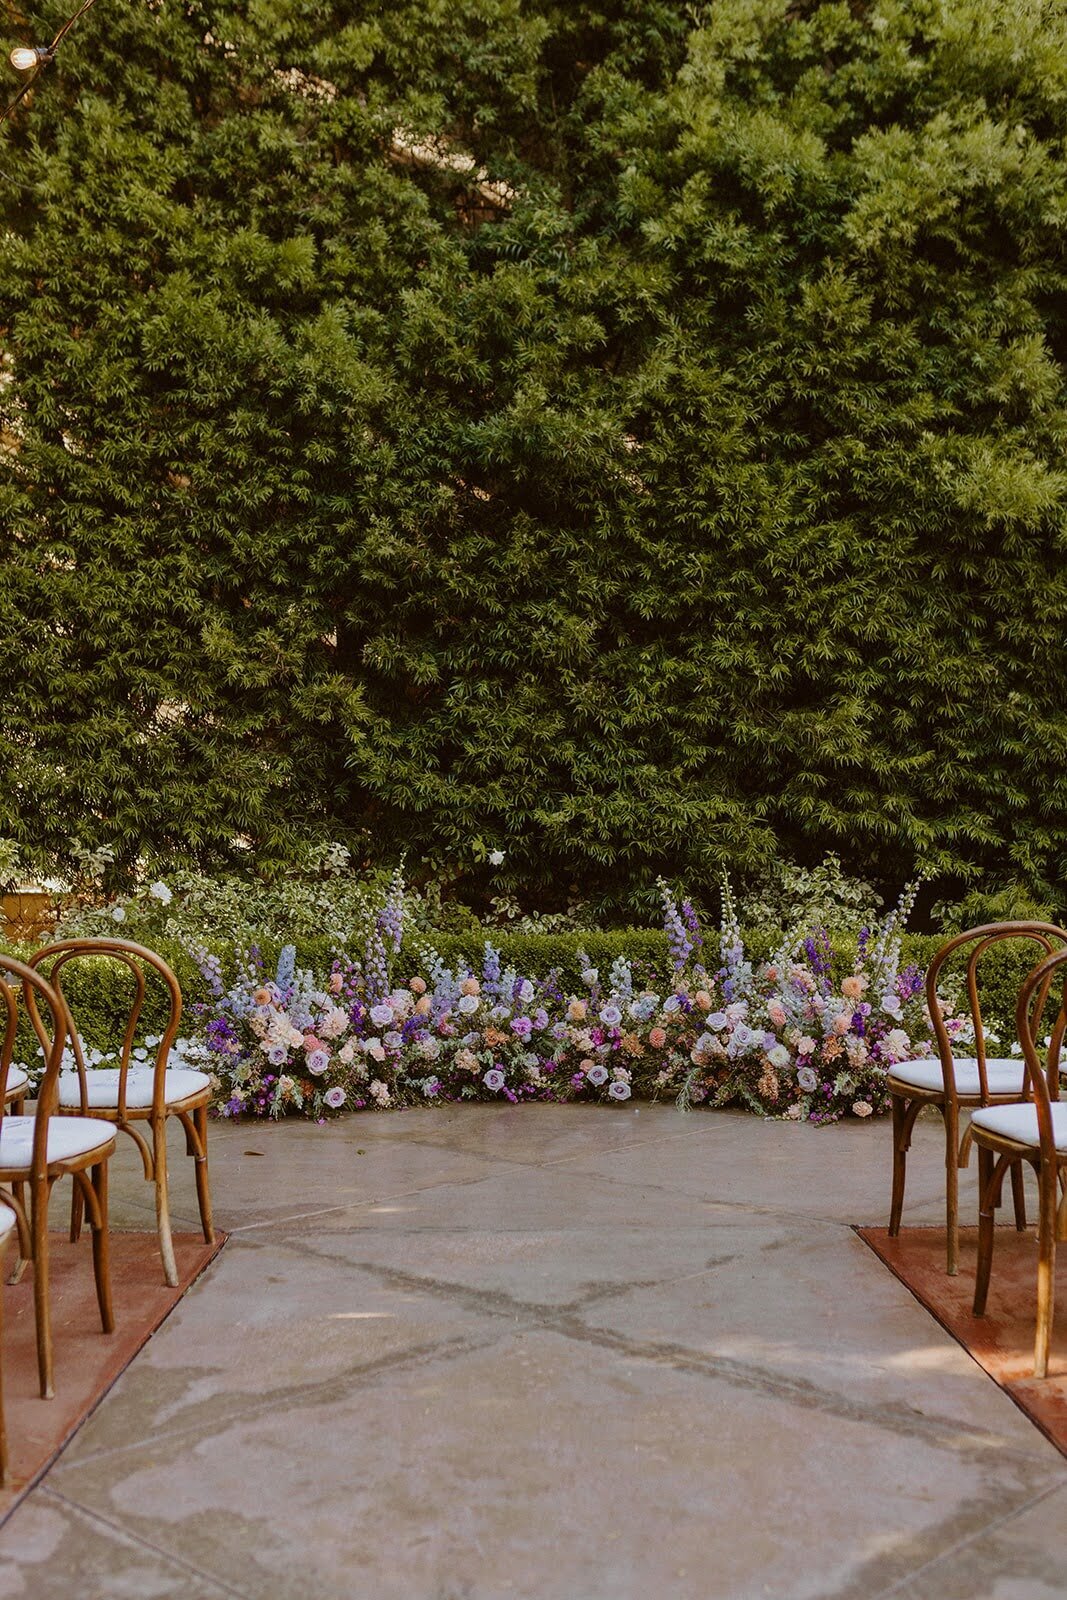 Ground florals in a wedding ceremony space